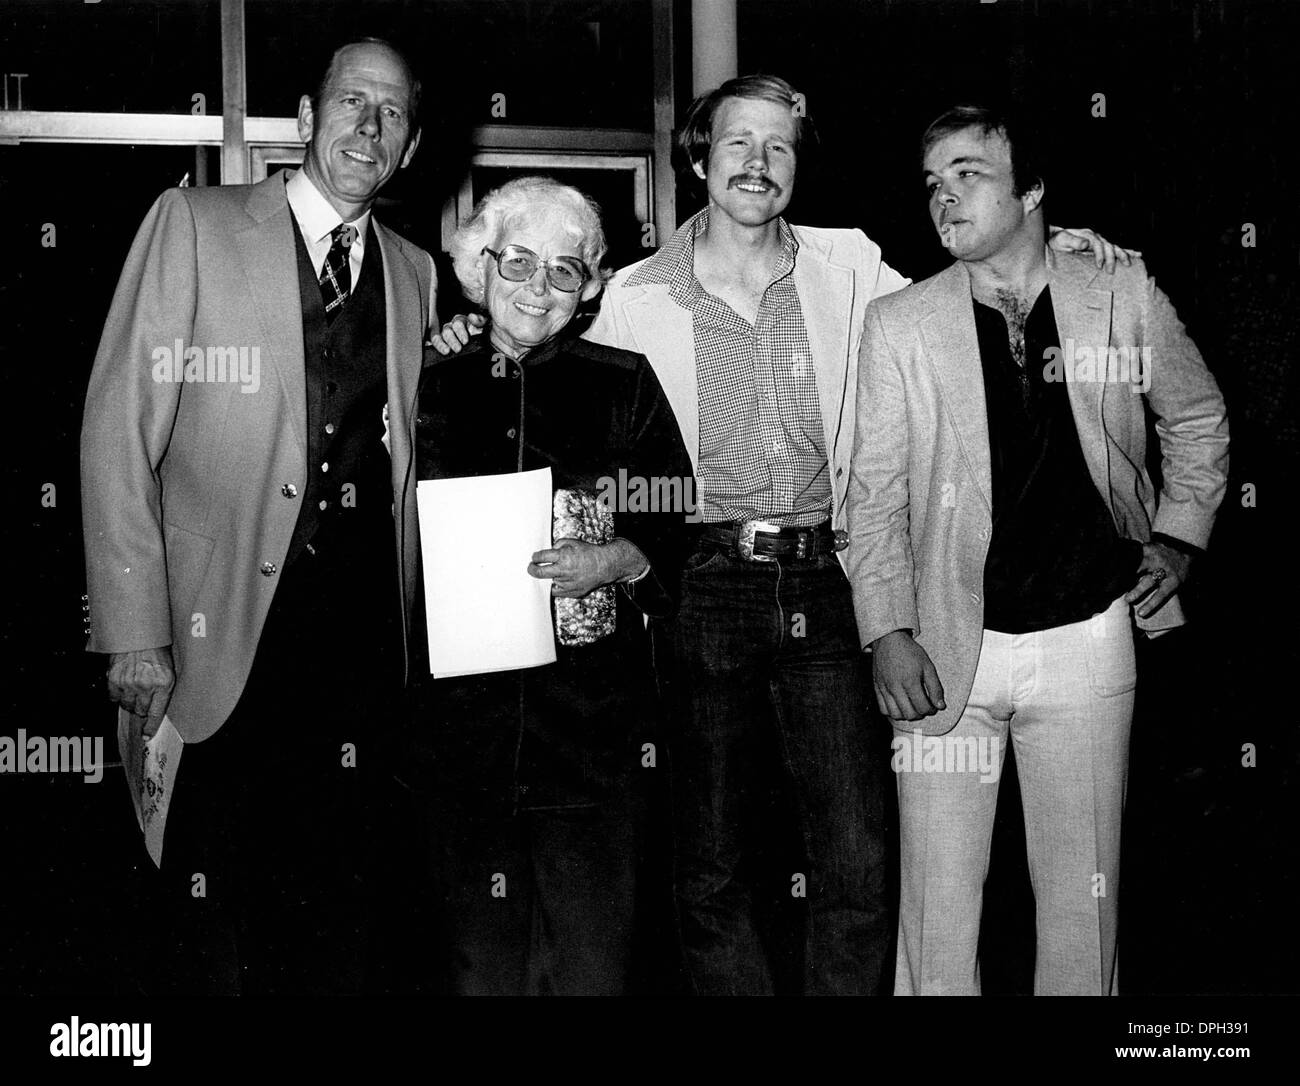 Ron clint rance howard jean Black and White Stock Photos & Images - Alamy